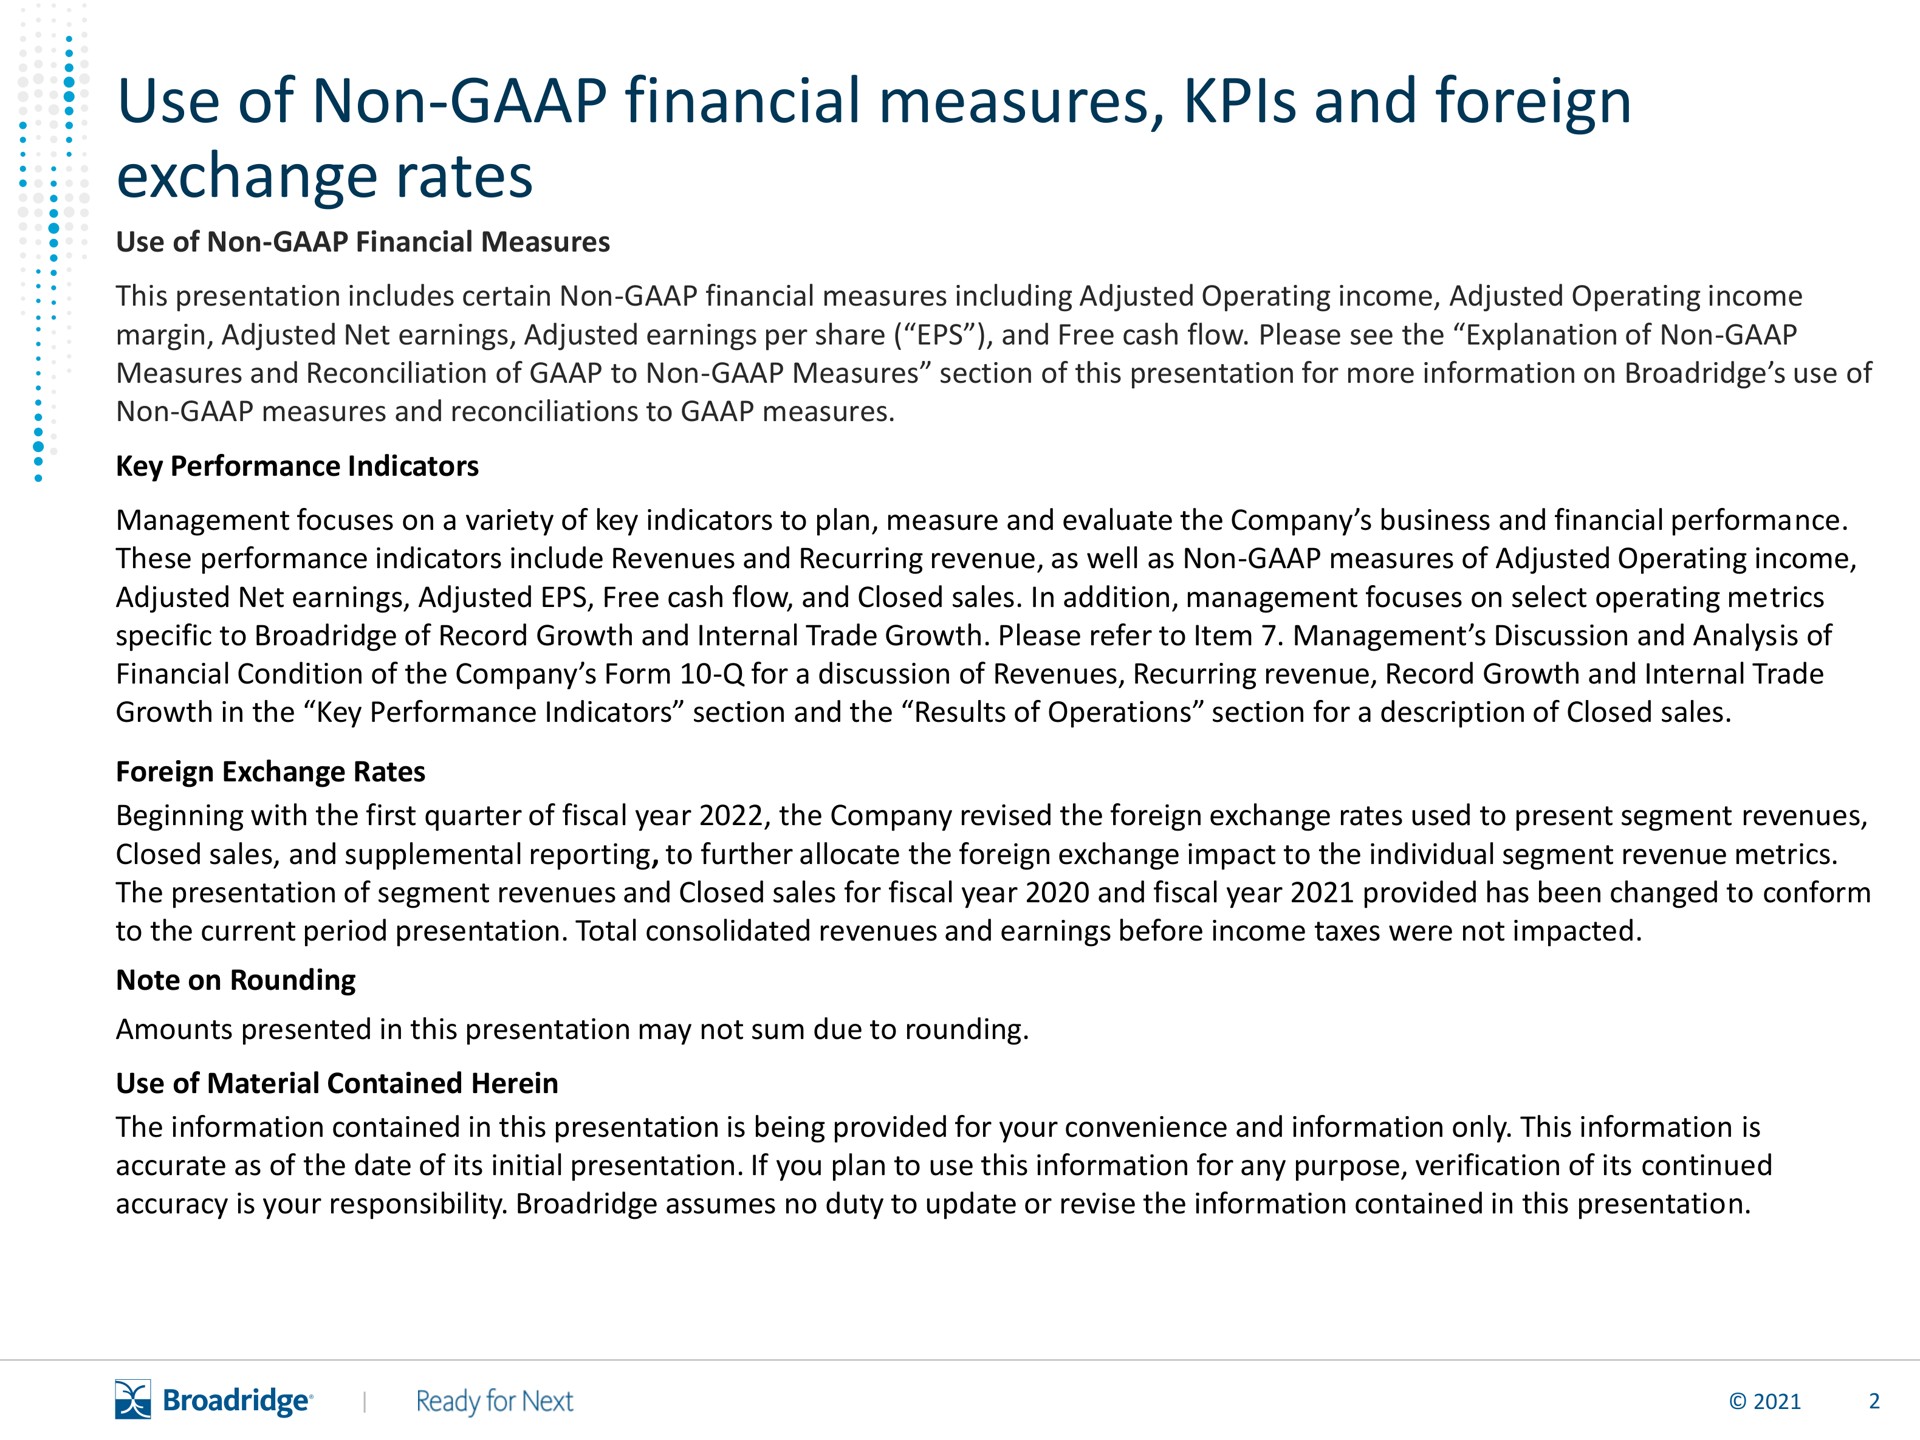 use of non financial measures and foreign exchange rates | Broadridge Financial Solutions